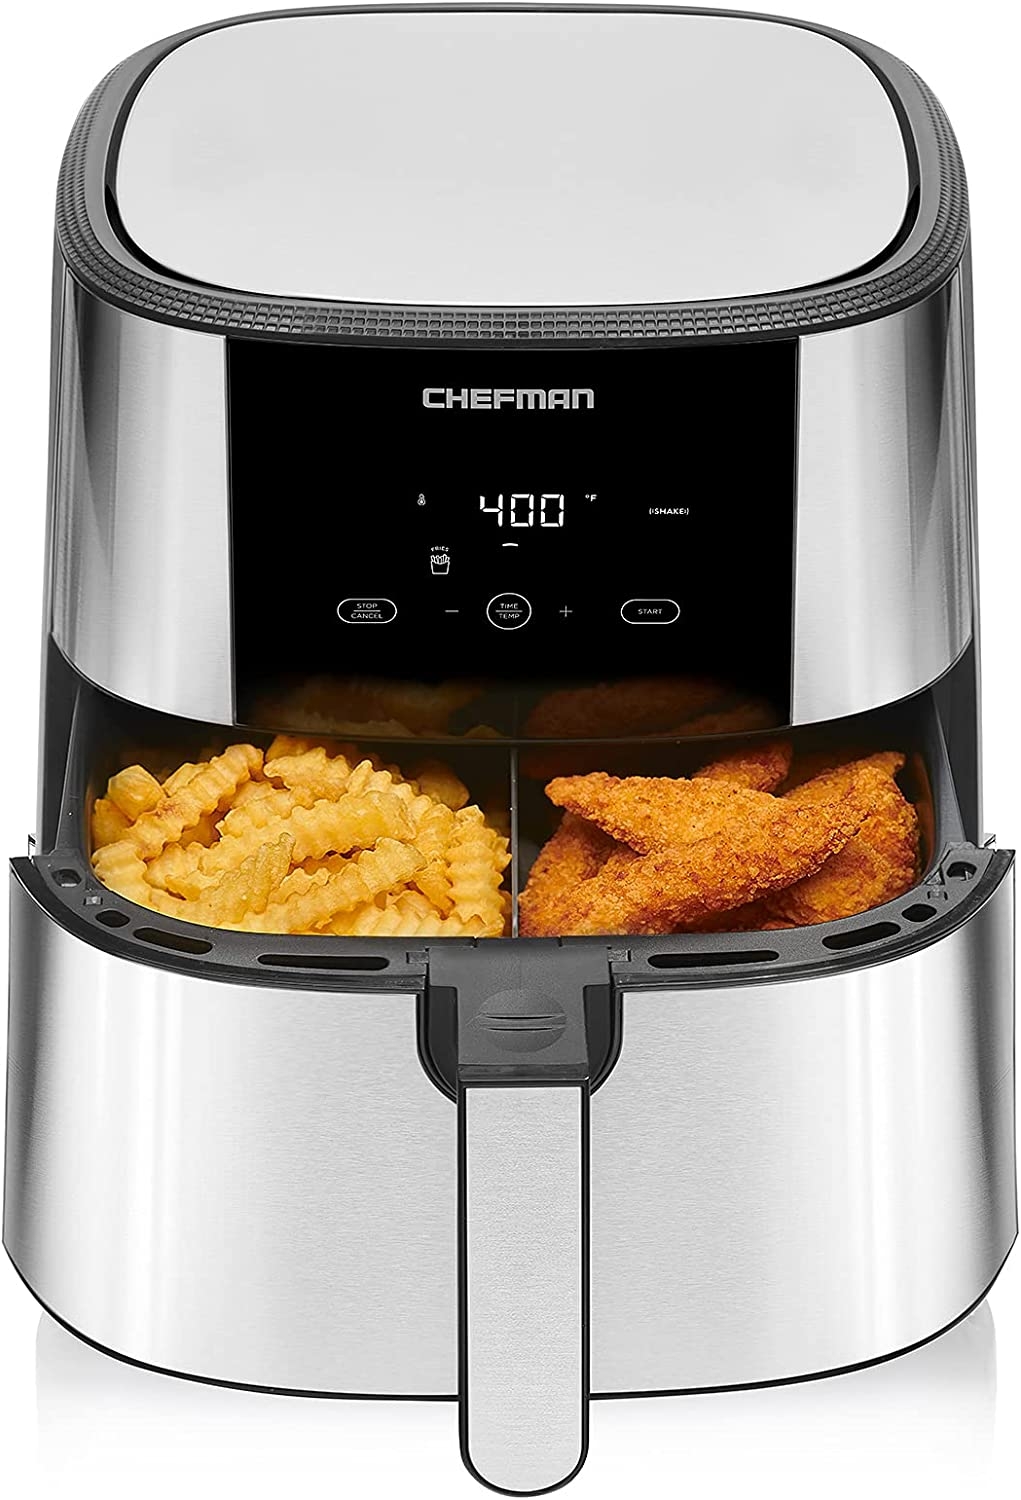 CHEFMAN Air Fryer Toaster Oven XL 20L, Healthy Cooking & User Friendly, Countertop Convection Bake & Broil, 9 Cooking Functions,